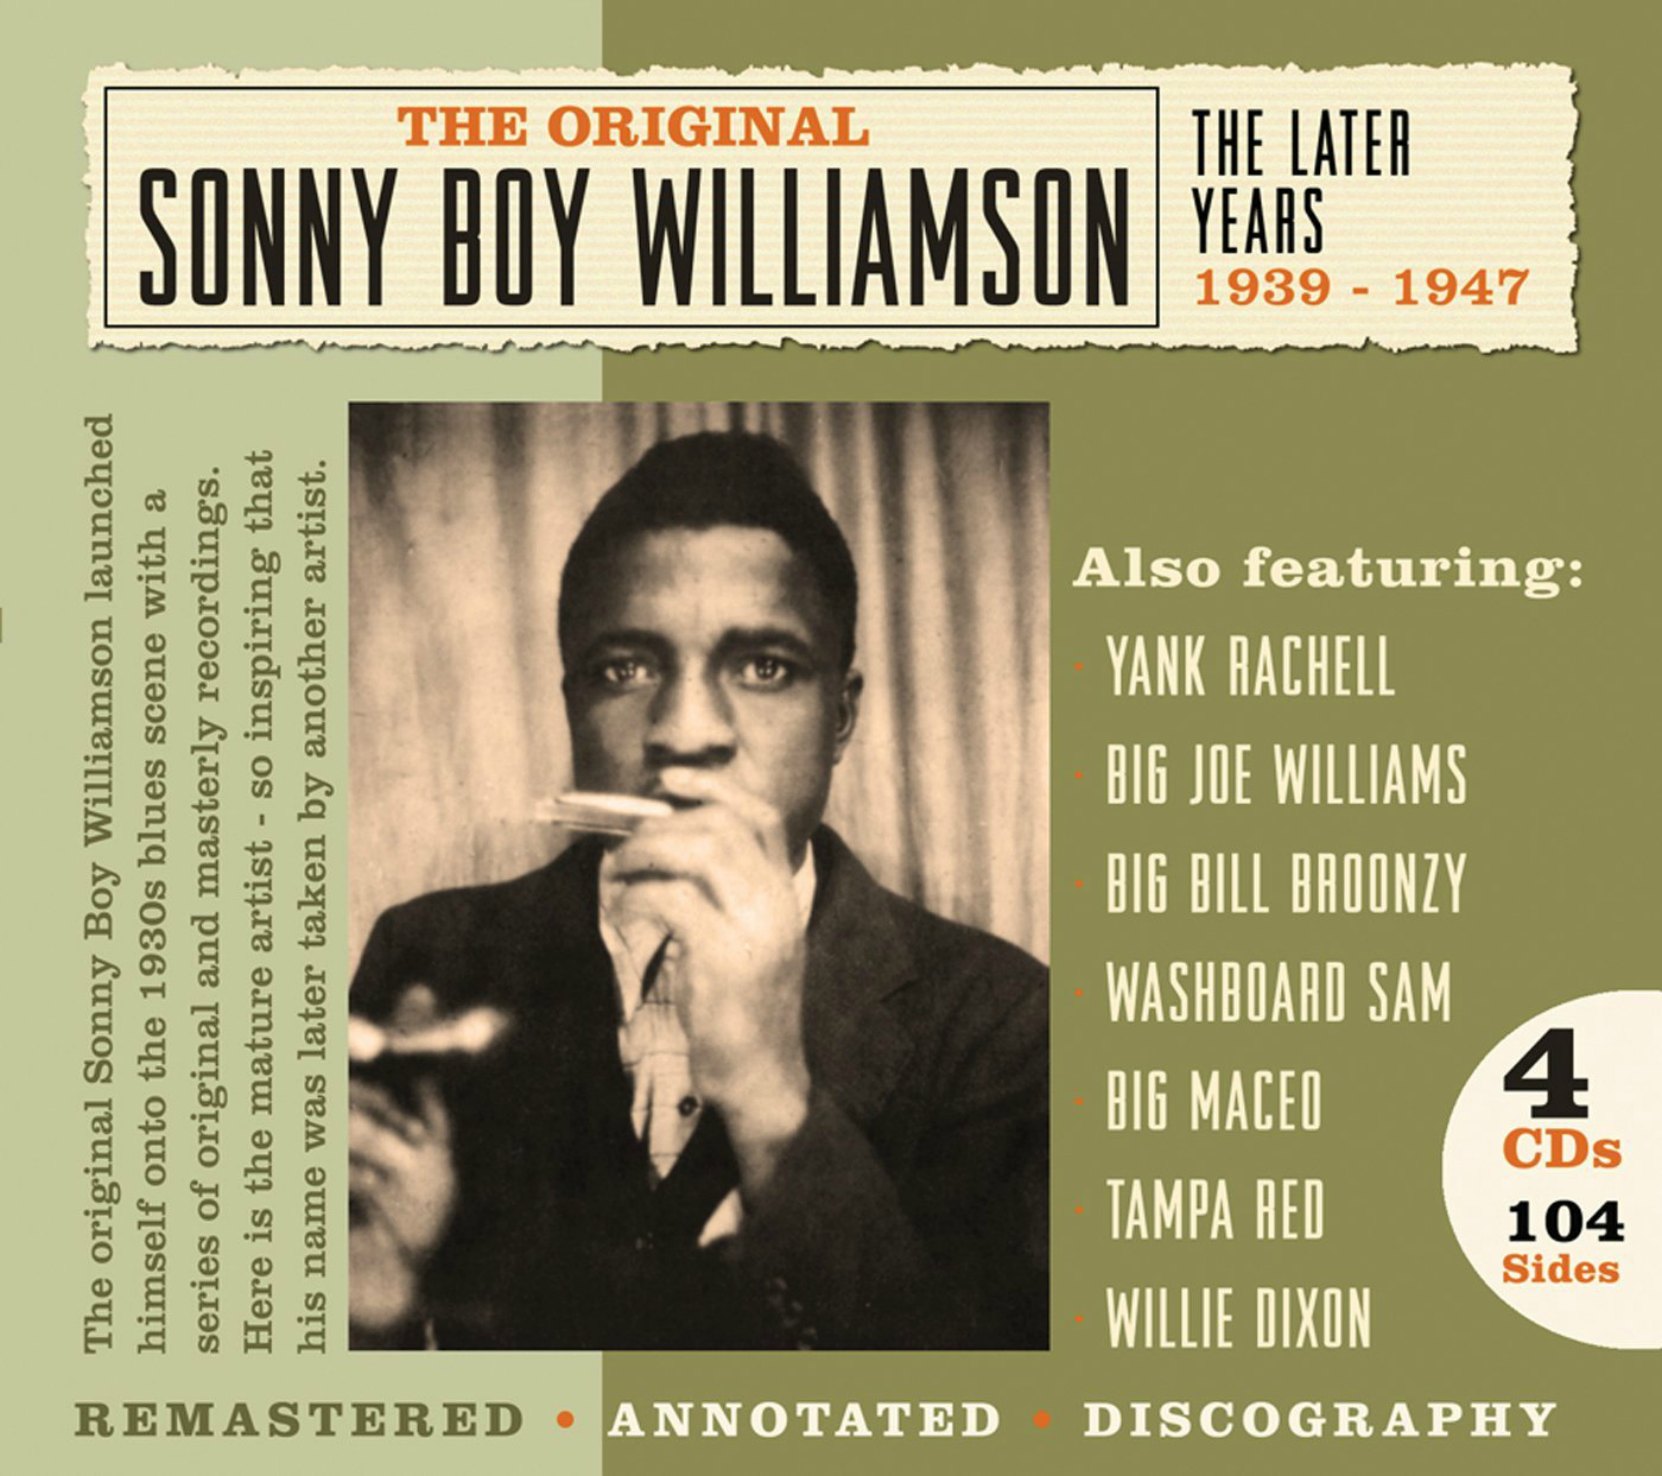 CD cover,Sonny Boy Williamson, The Later Years 1939-1947, a 4 CD, 104 track set released on JSP Records